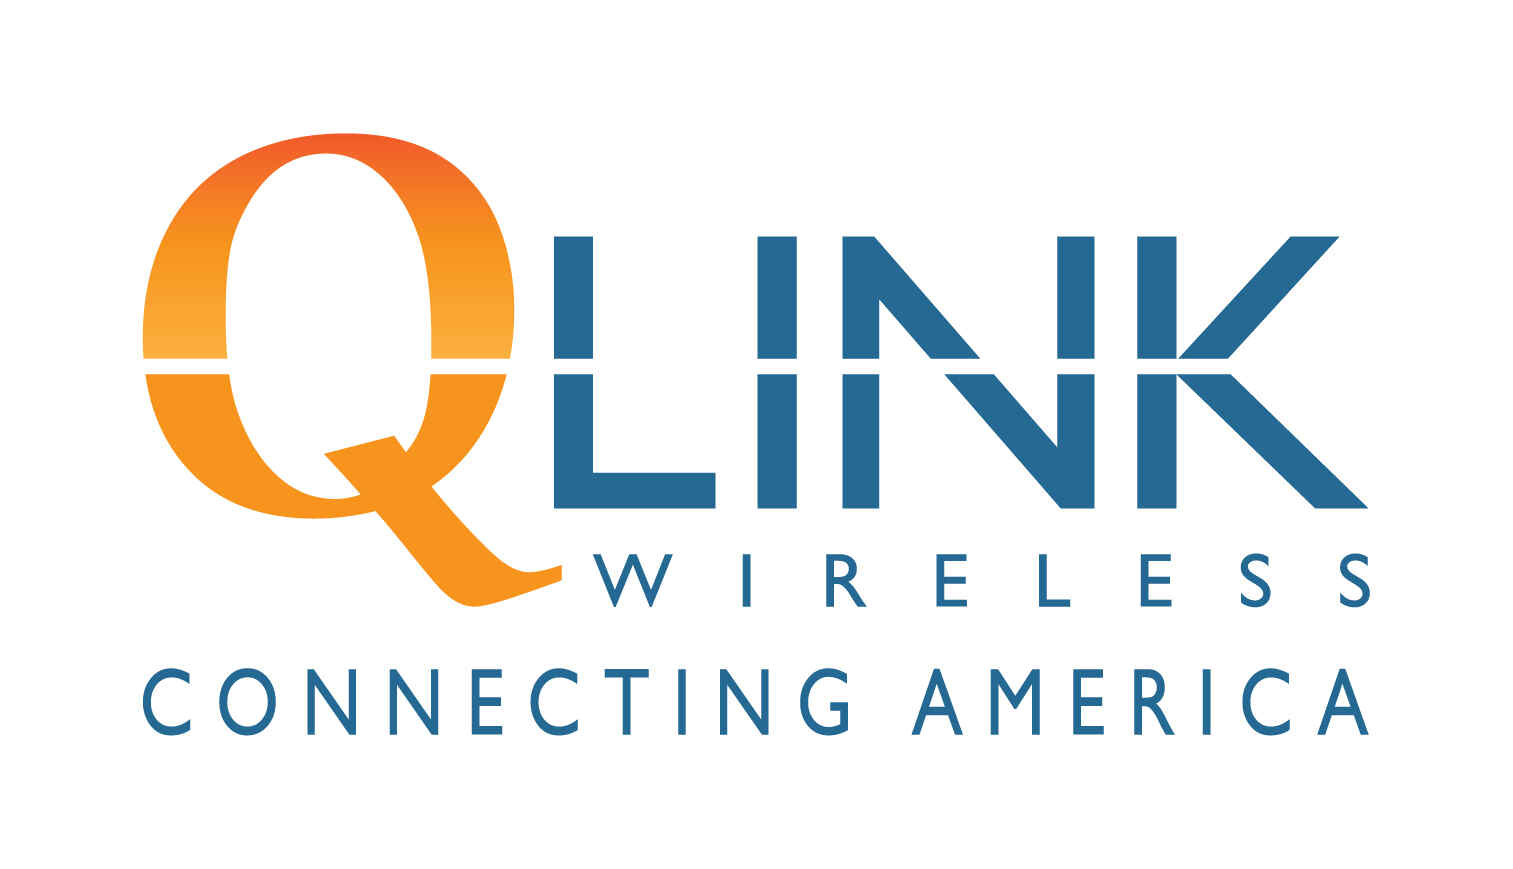 What is Q Link Wireless